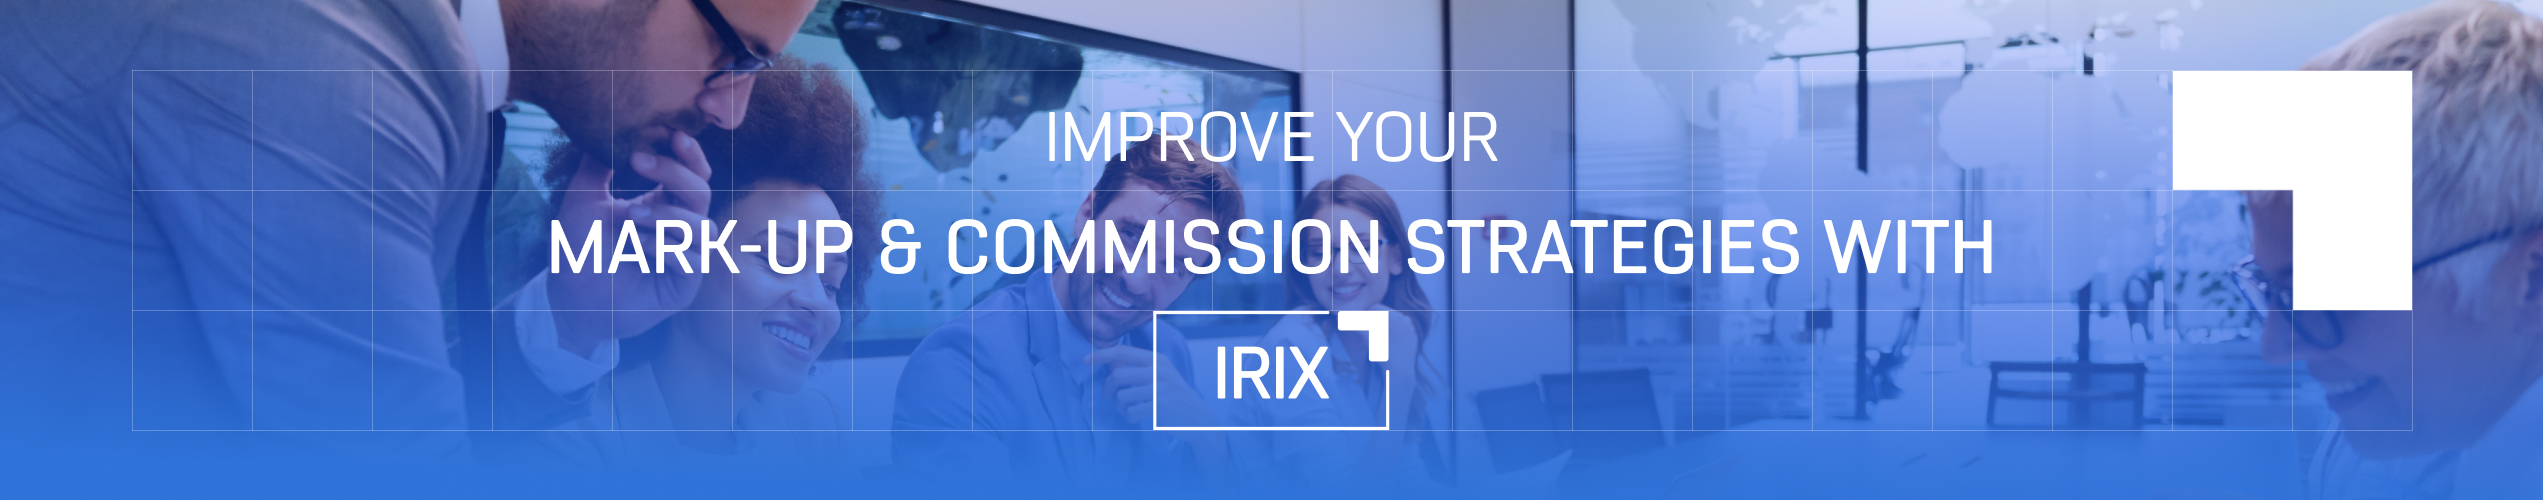 IRIX - mark-up and commission